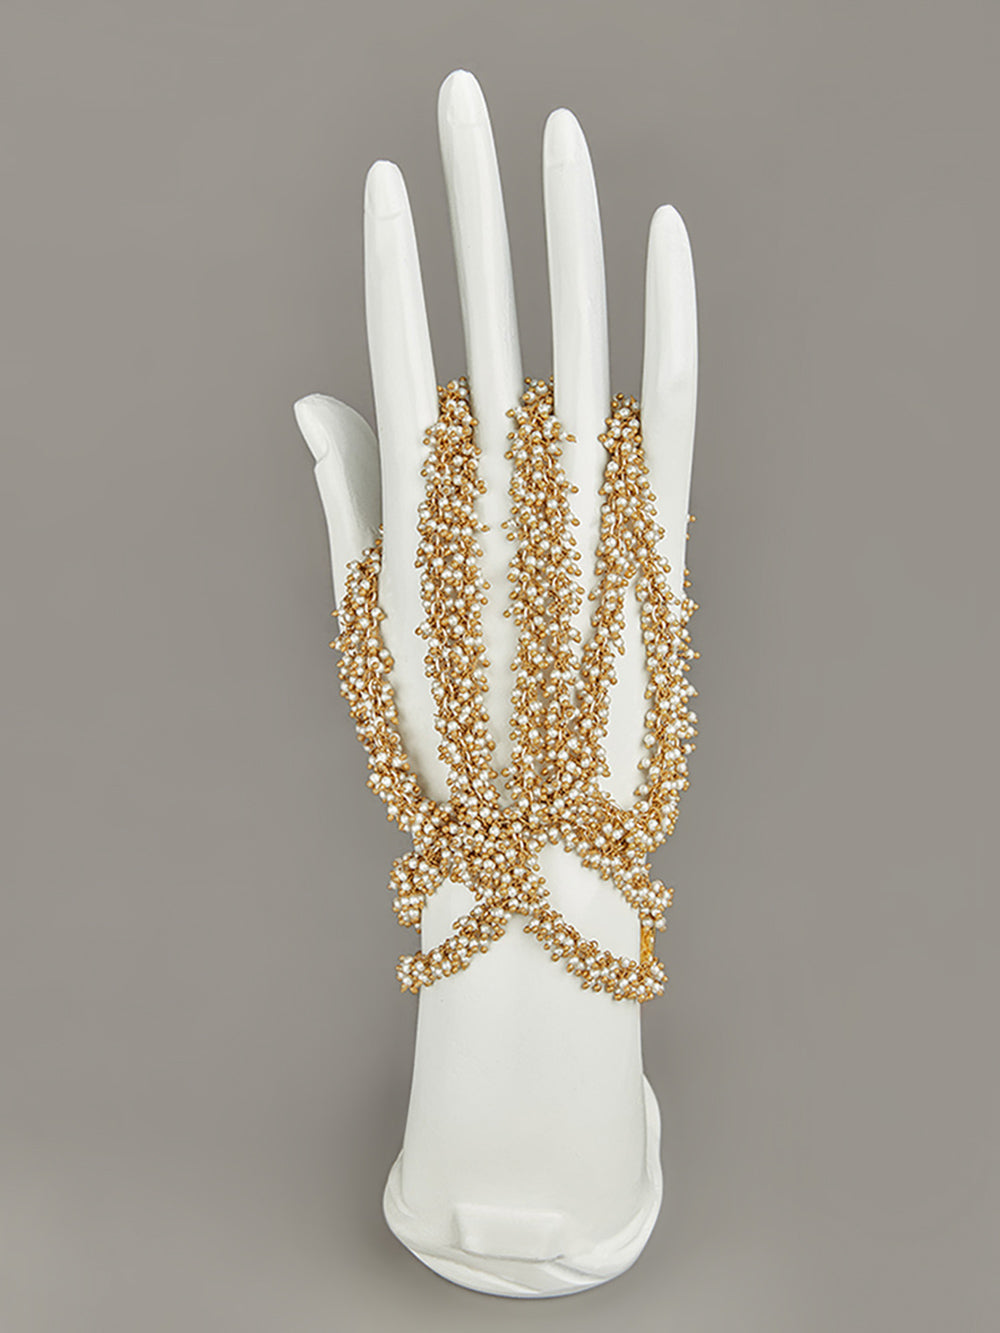 Amama,Intricate Contemporary White Pearl Studded Hand Harness